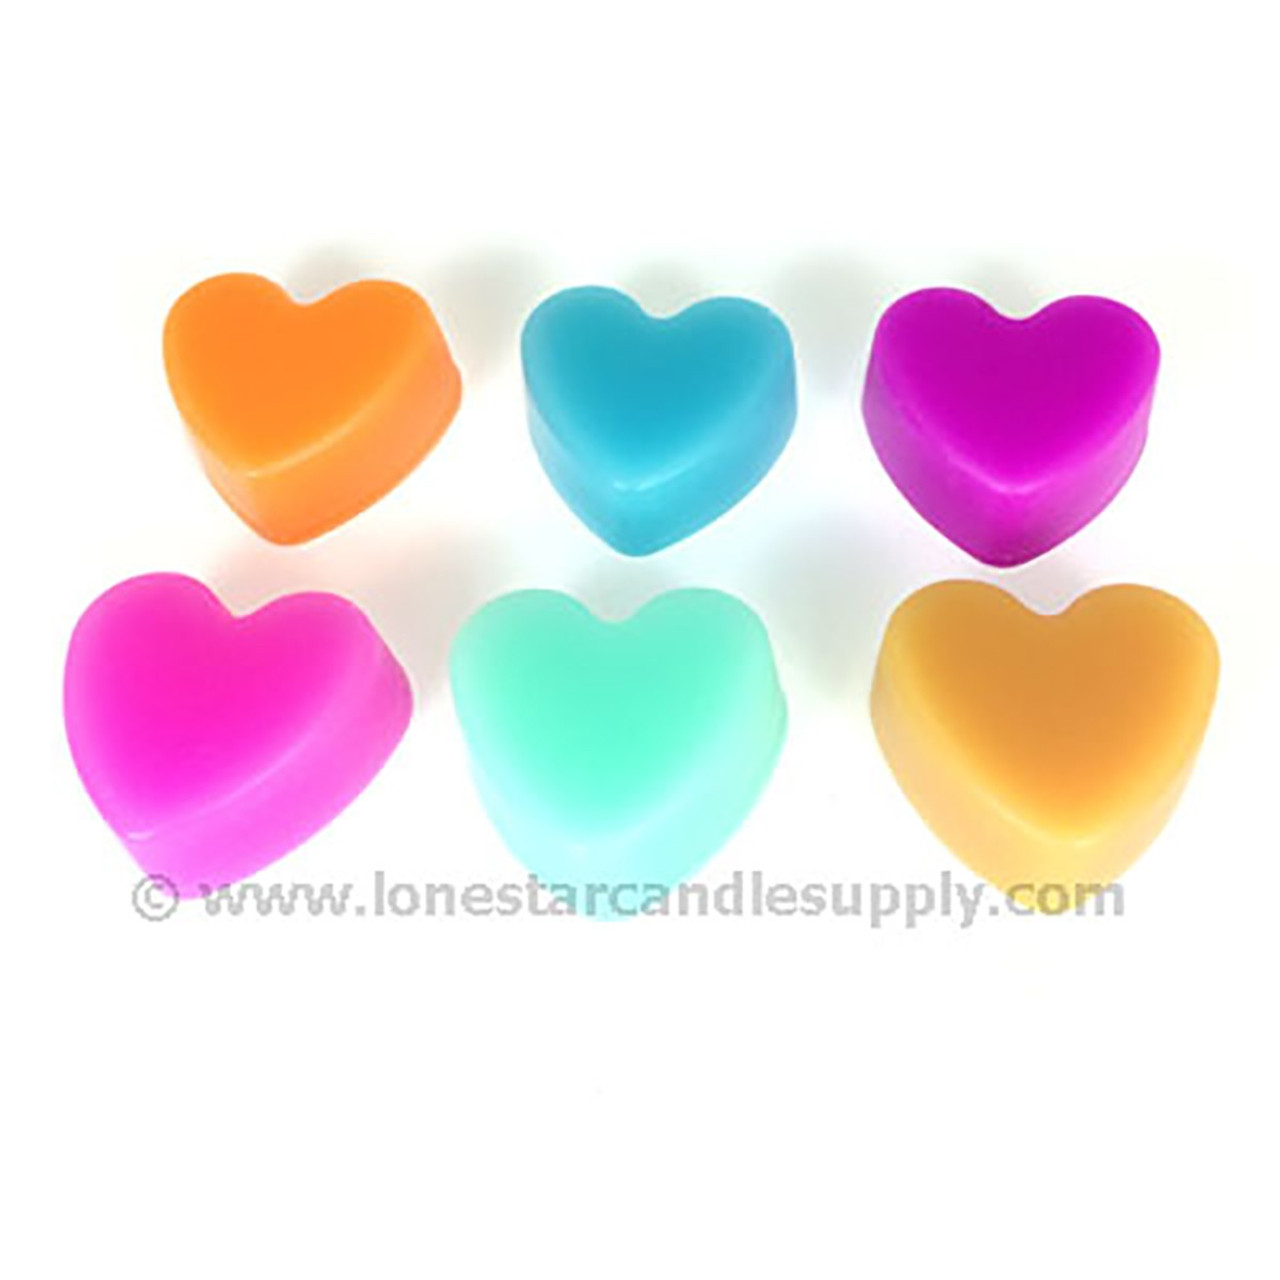 9 x 13 Heart Silicone Mold With 24 Cavities by STIR